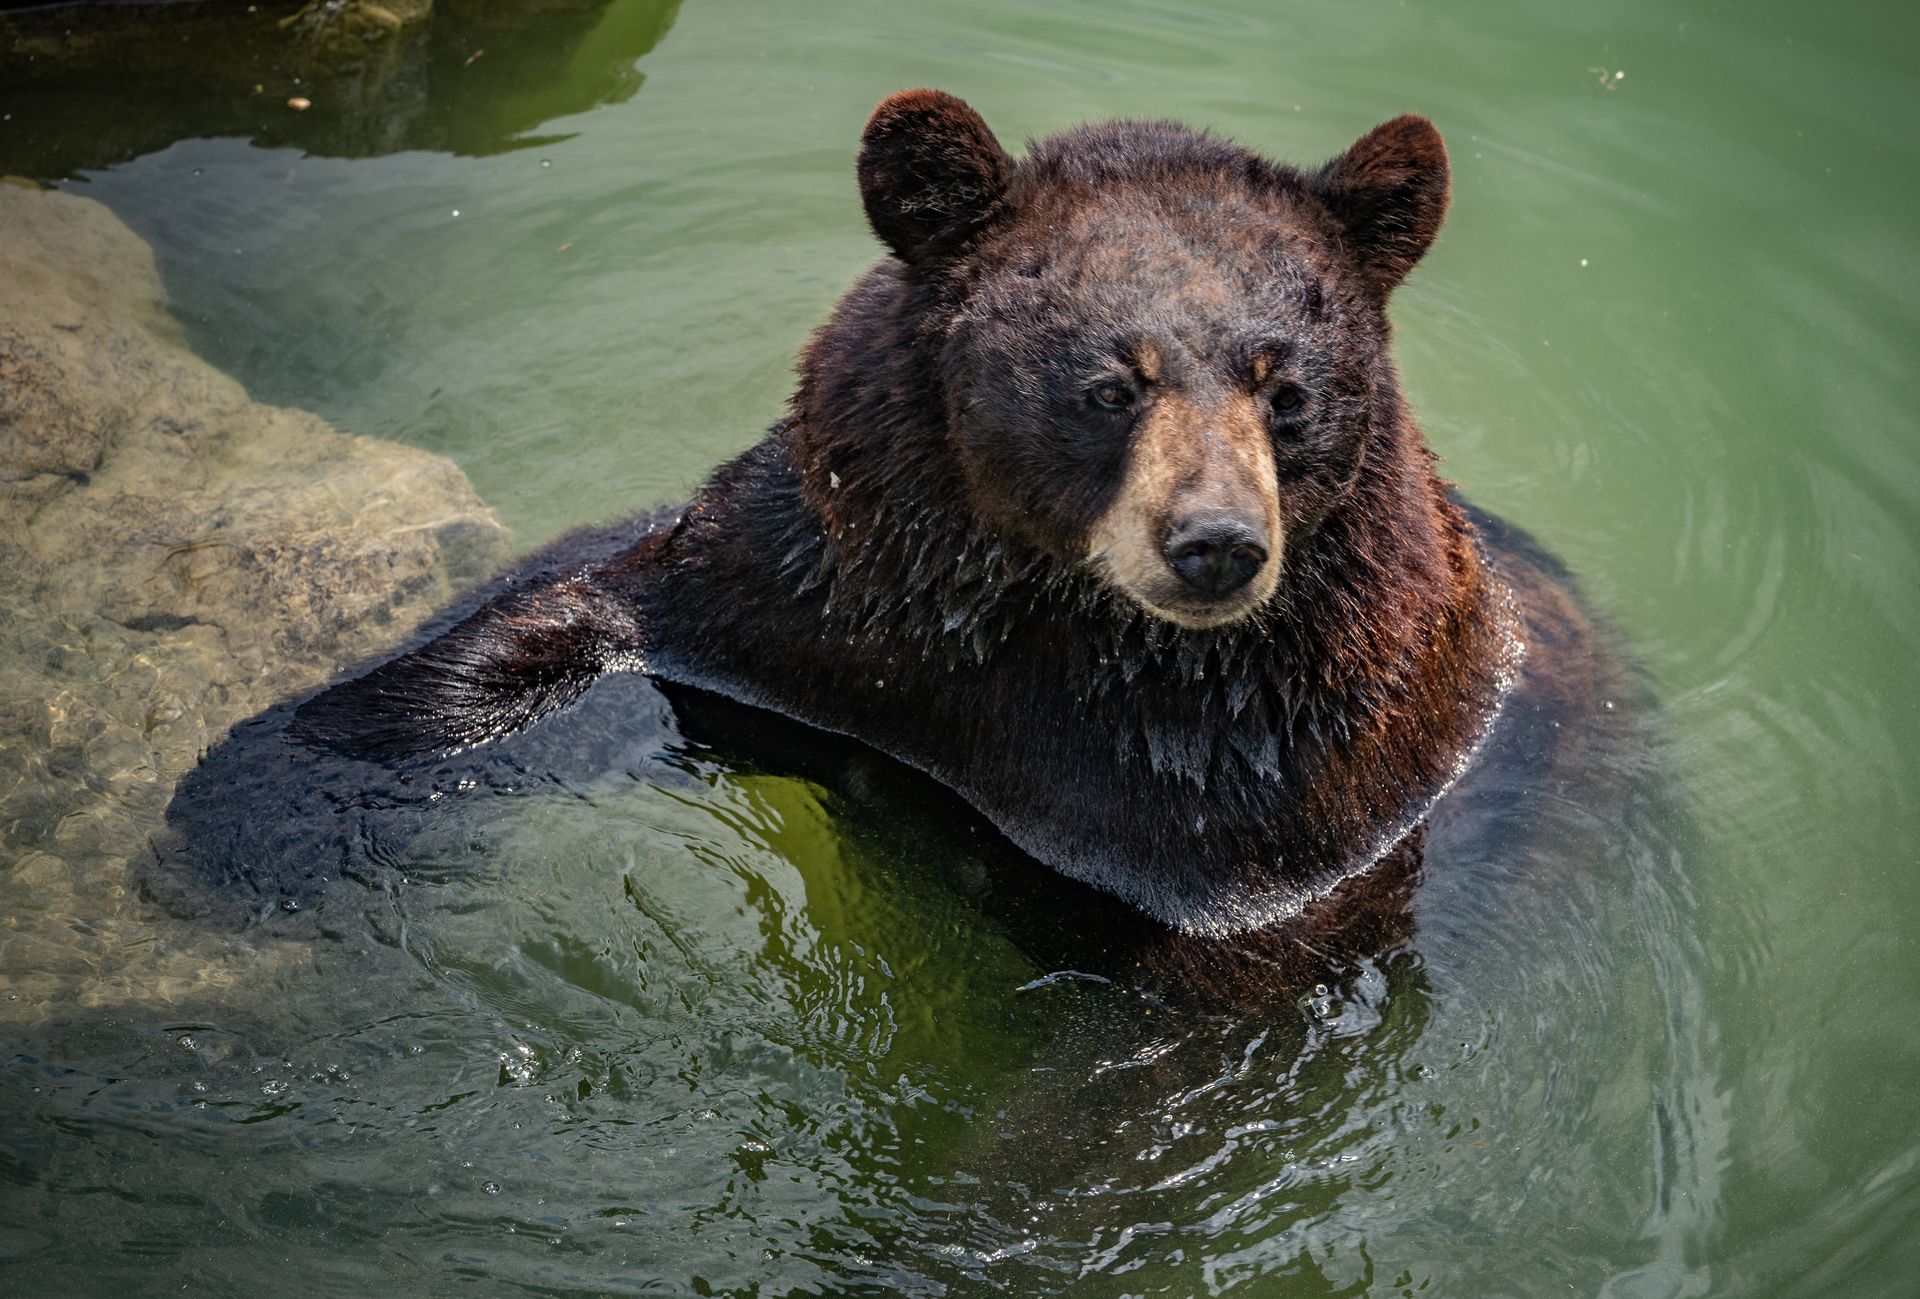 A brown bear is swimming in a body of water